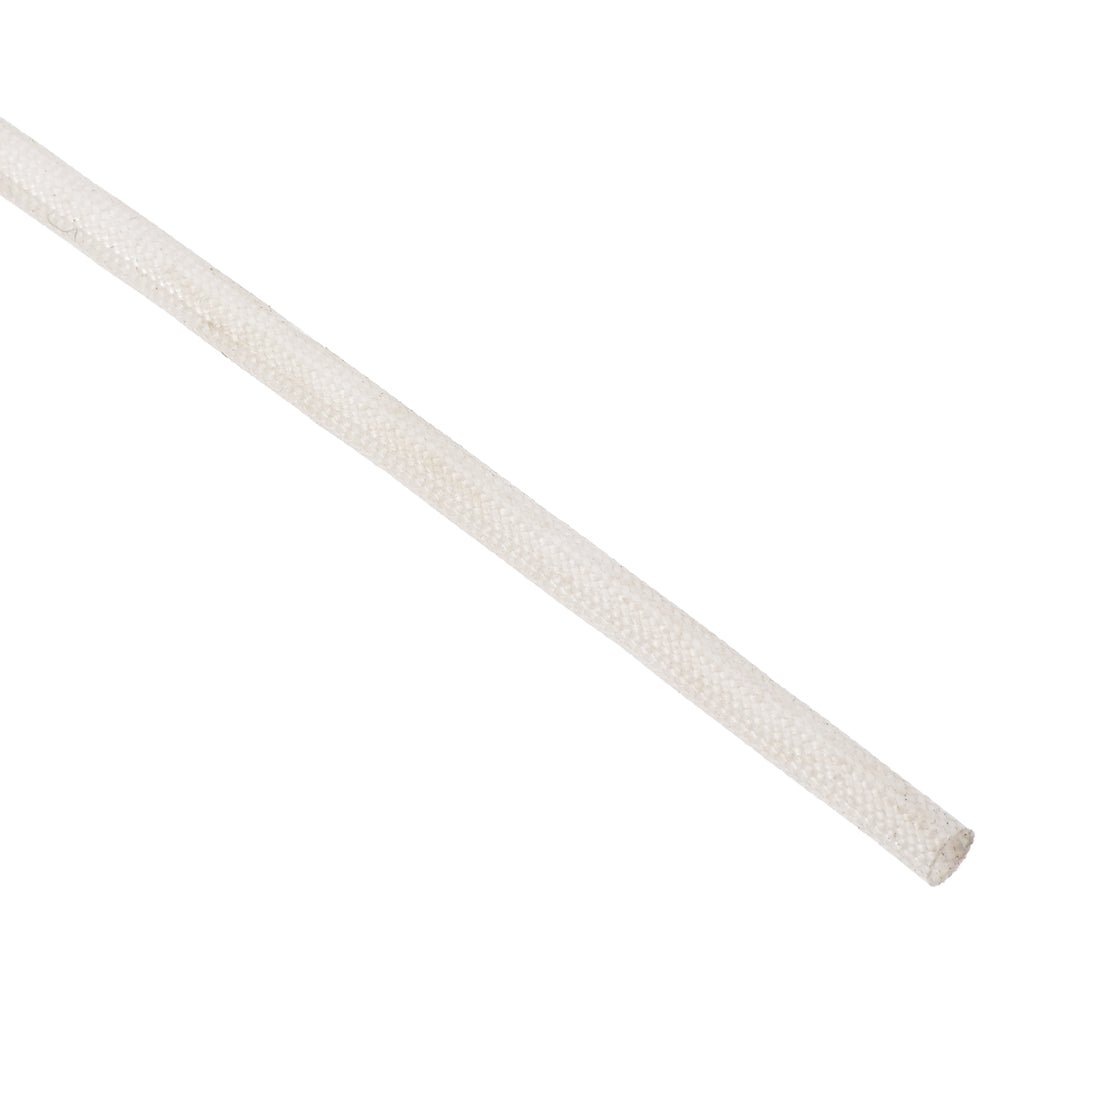 uxcell Uxcell Insulation Cable Protector,33Ft-2.5mm High TEMP Silicone Fiberglass Sleeve White